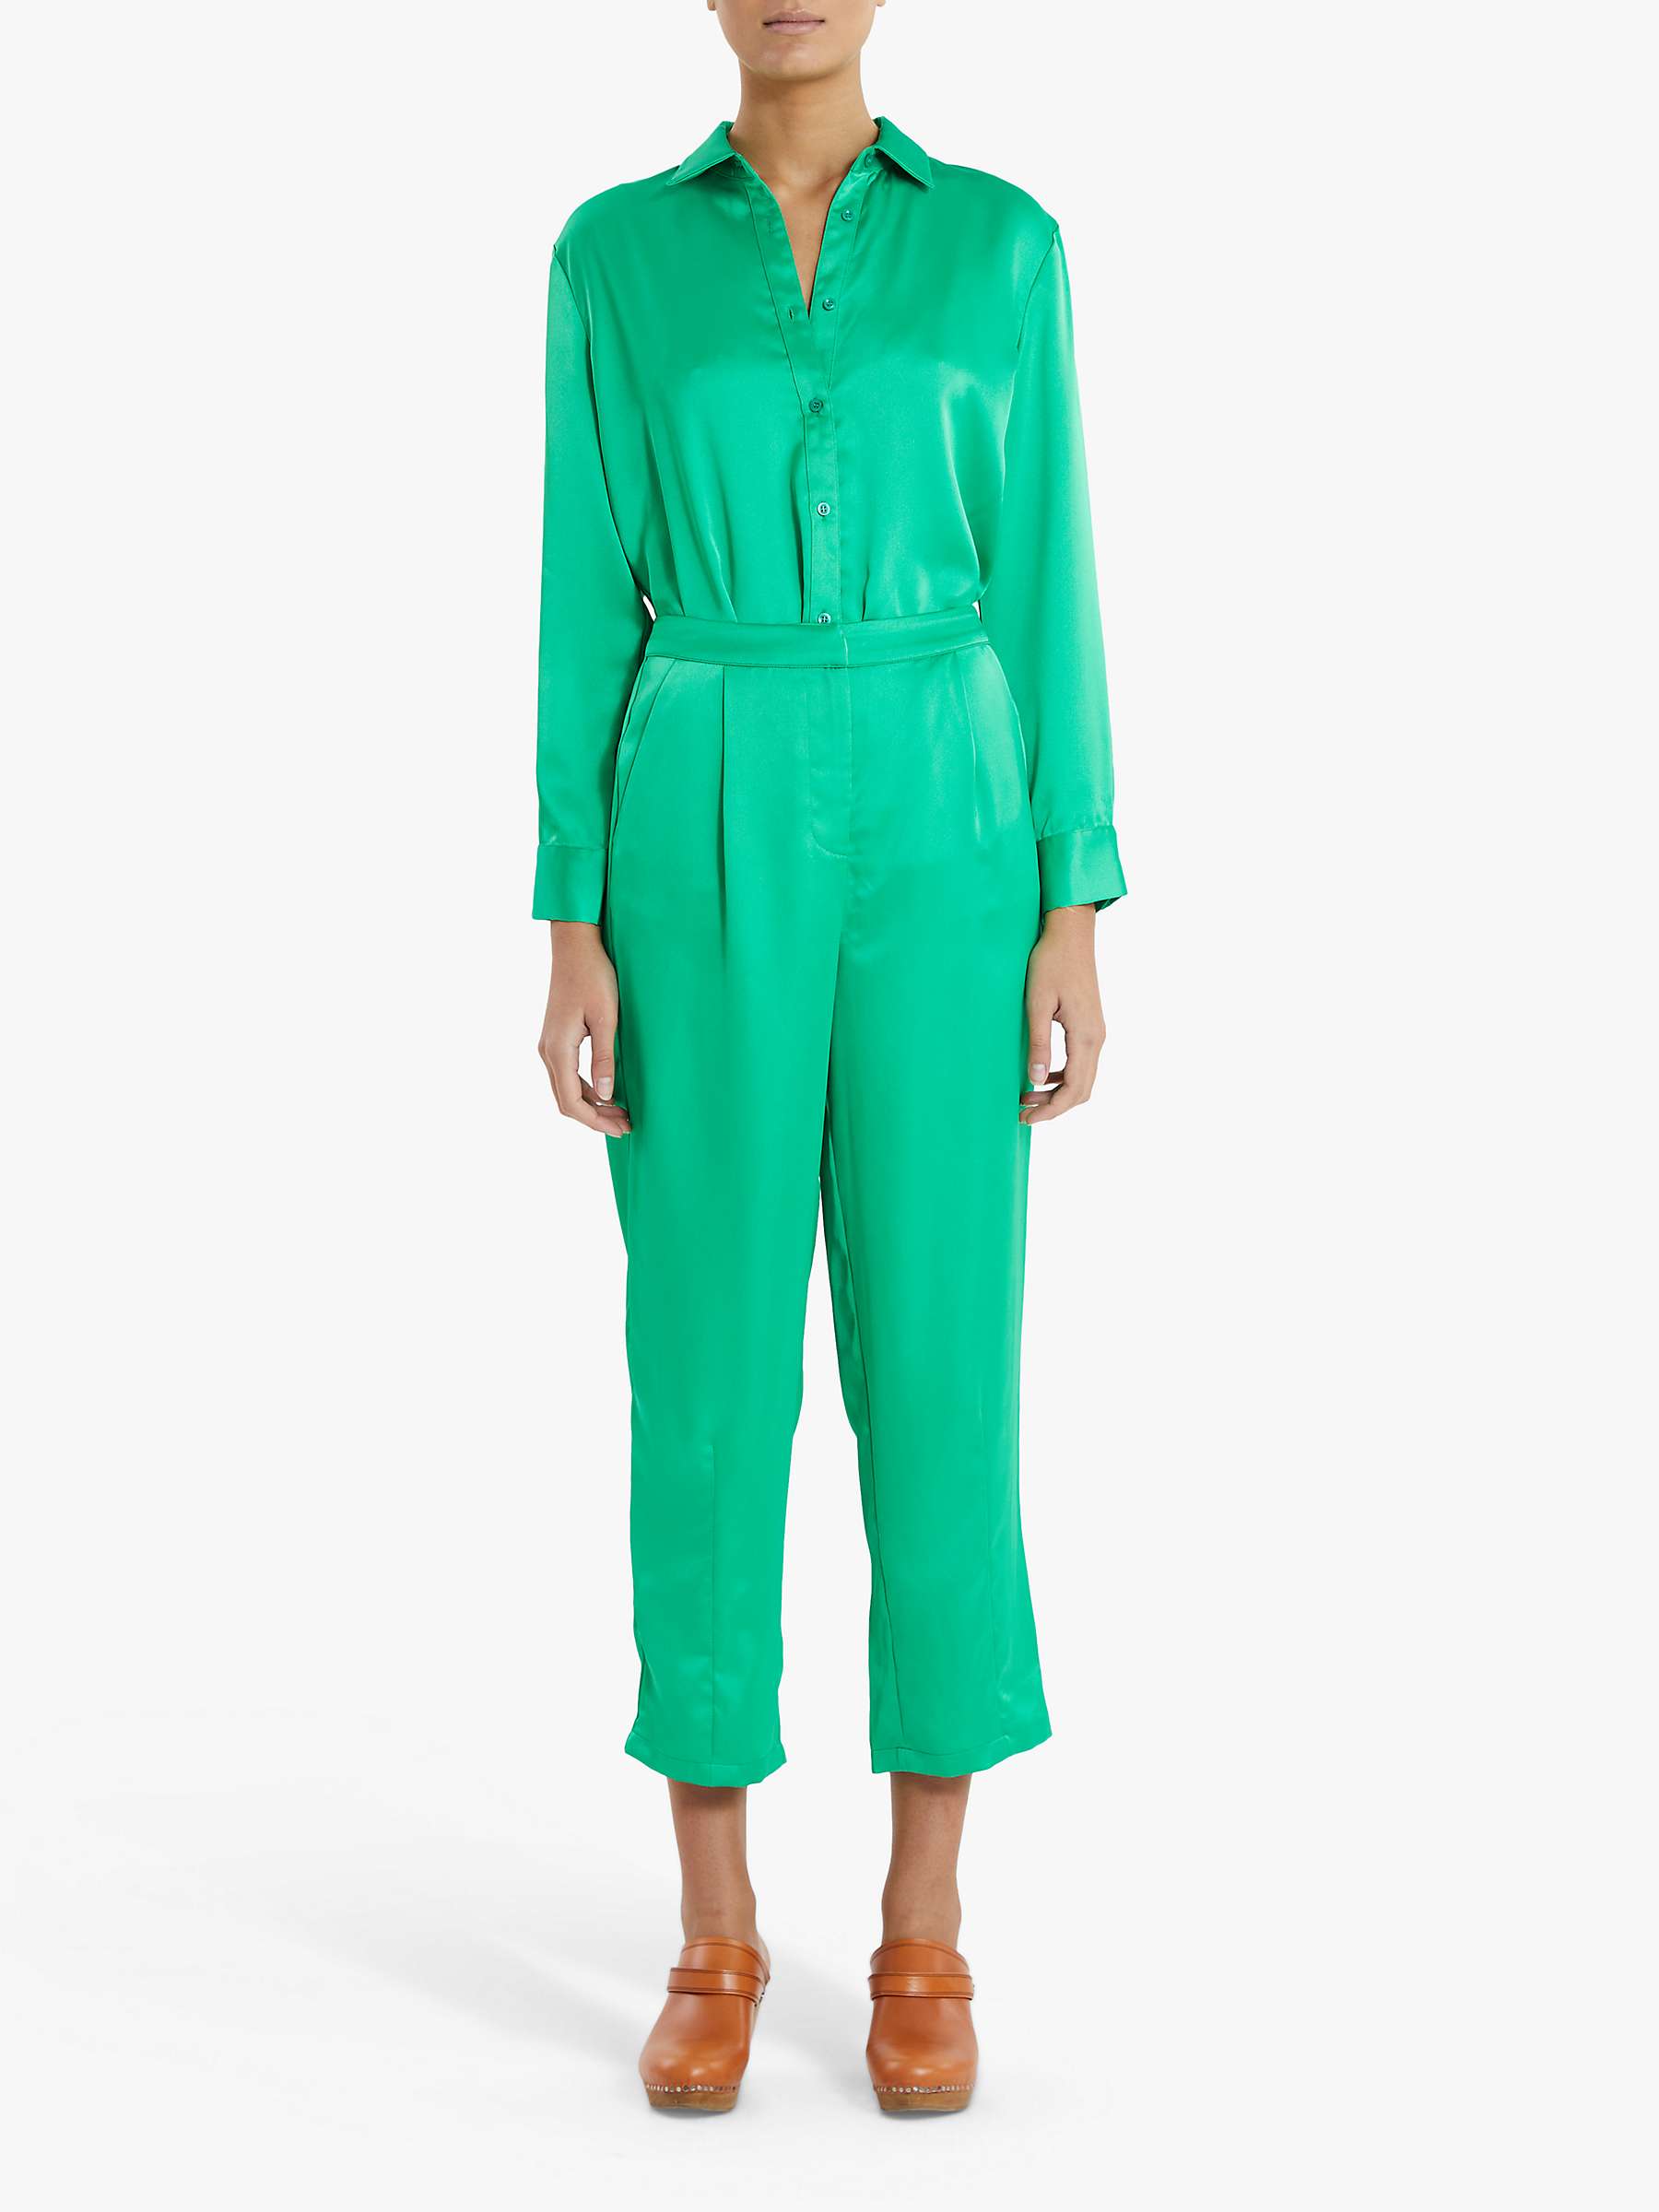 Buy Lollys Laundry Kayla Loose Fitted Shirt, Green Online at johnlewis.com